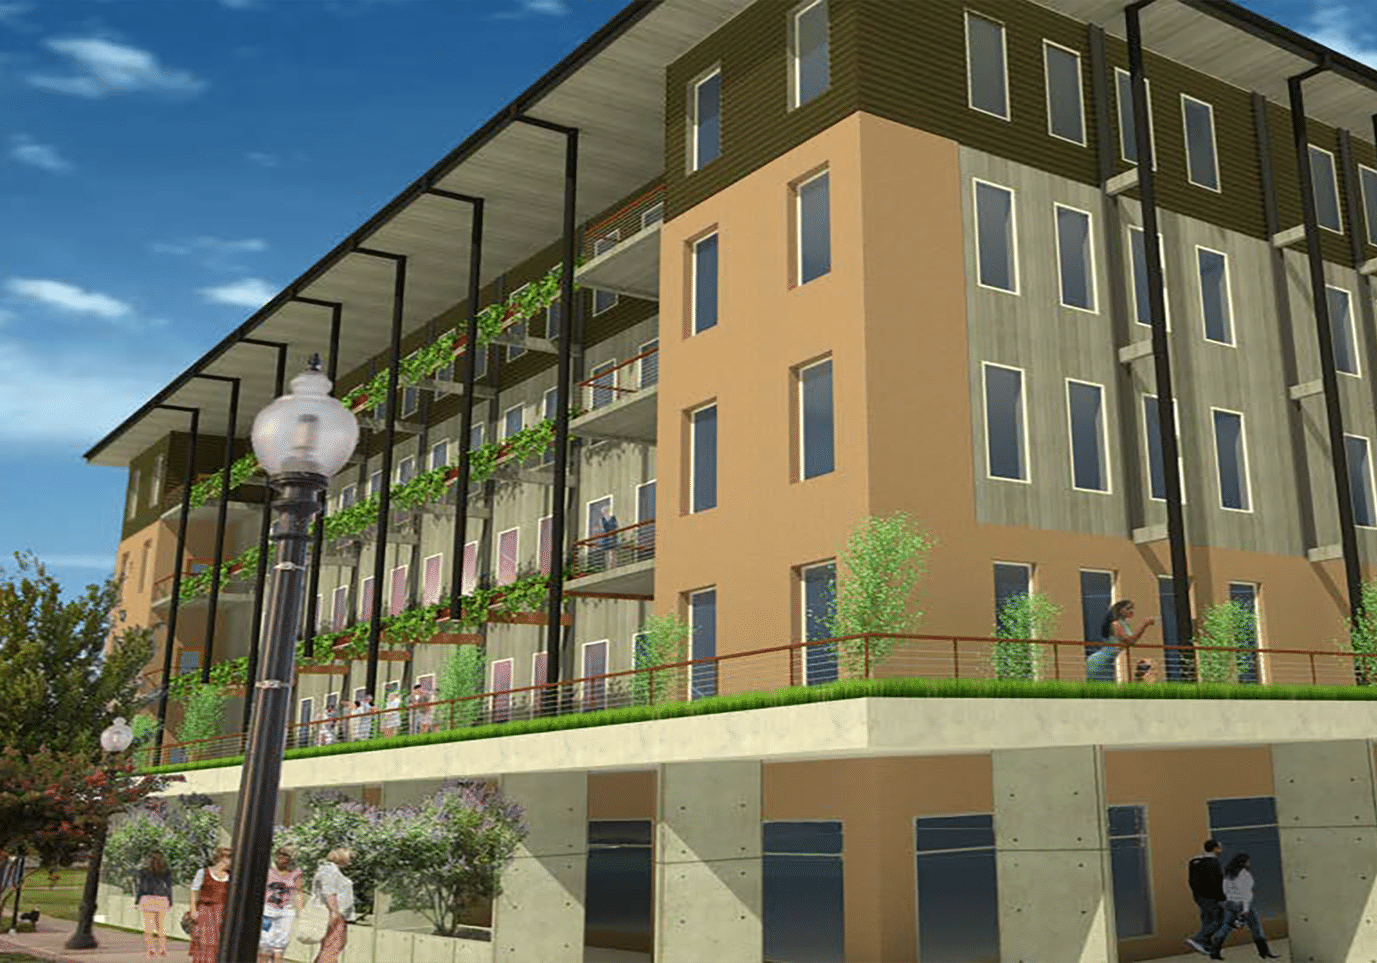 Rendered Image of Jordan Lofts located in Bryan-College Station - an Opportunity zone asset owned by Caliber